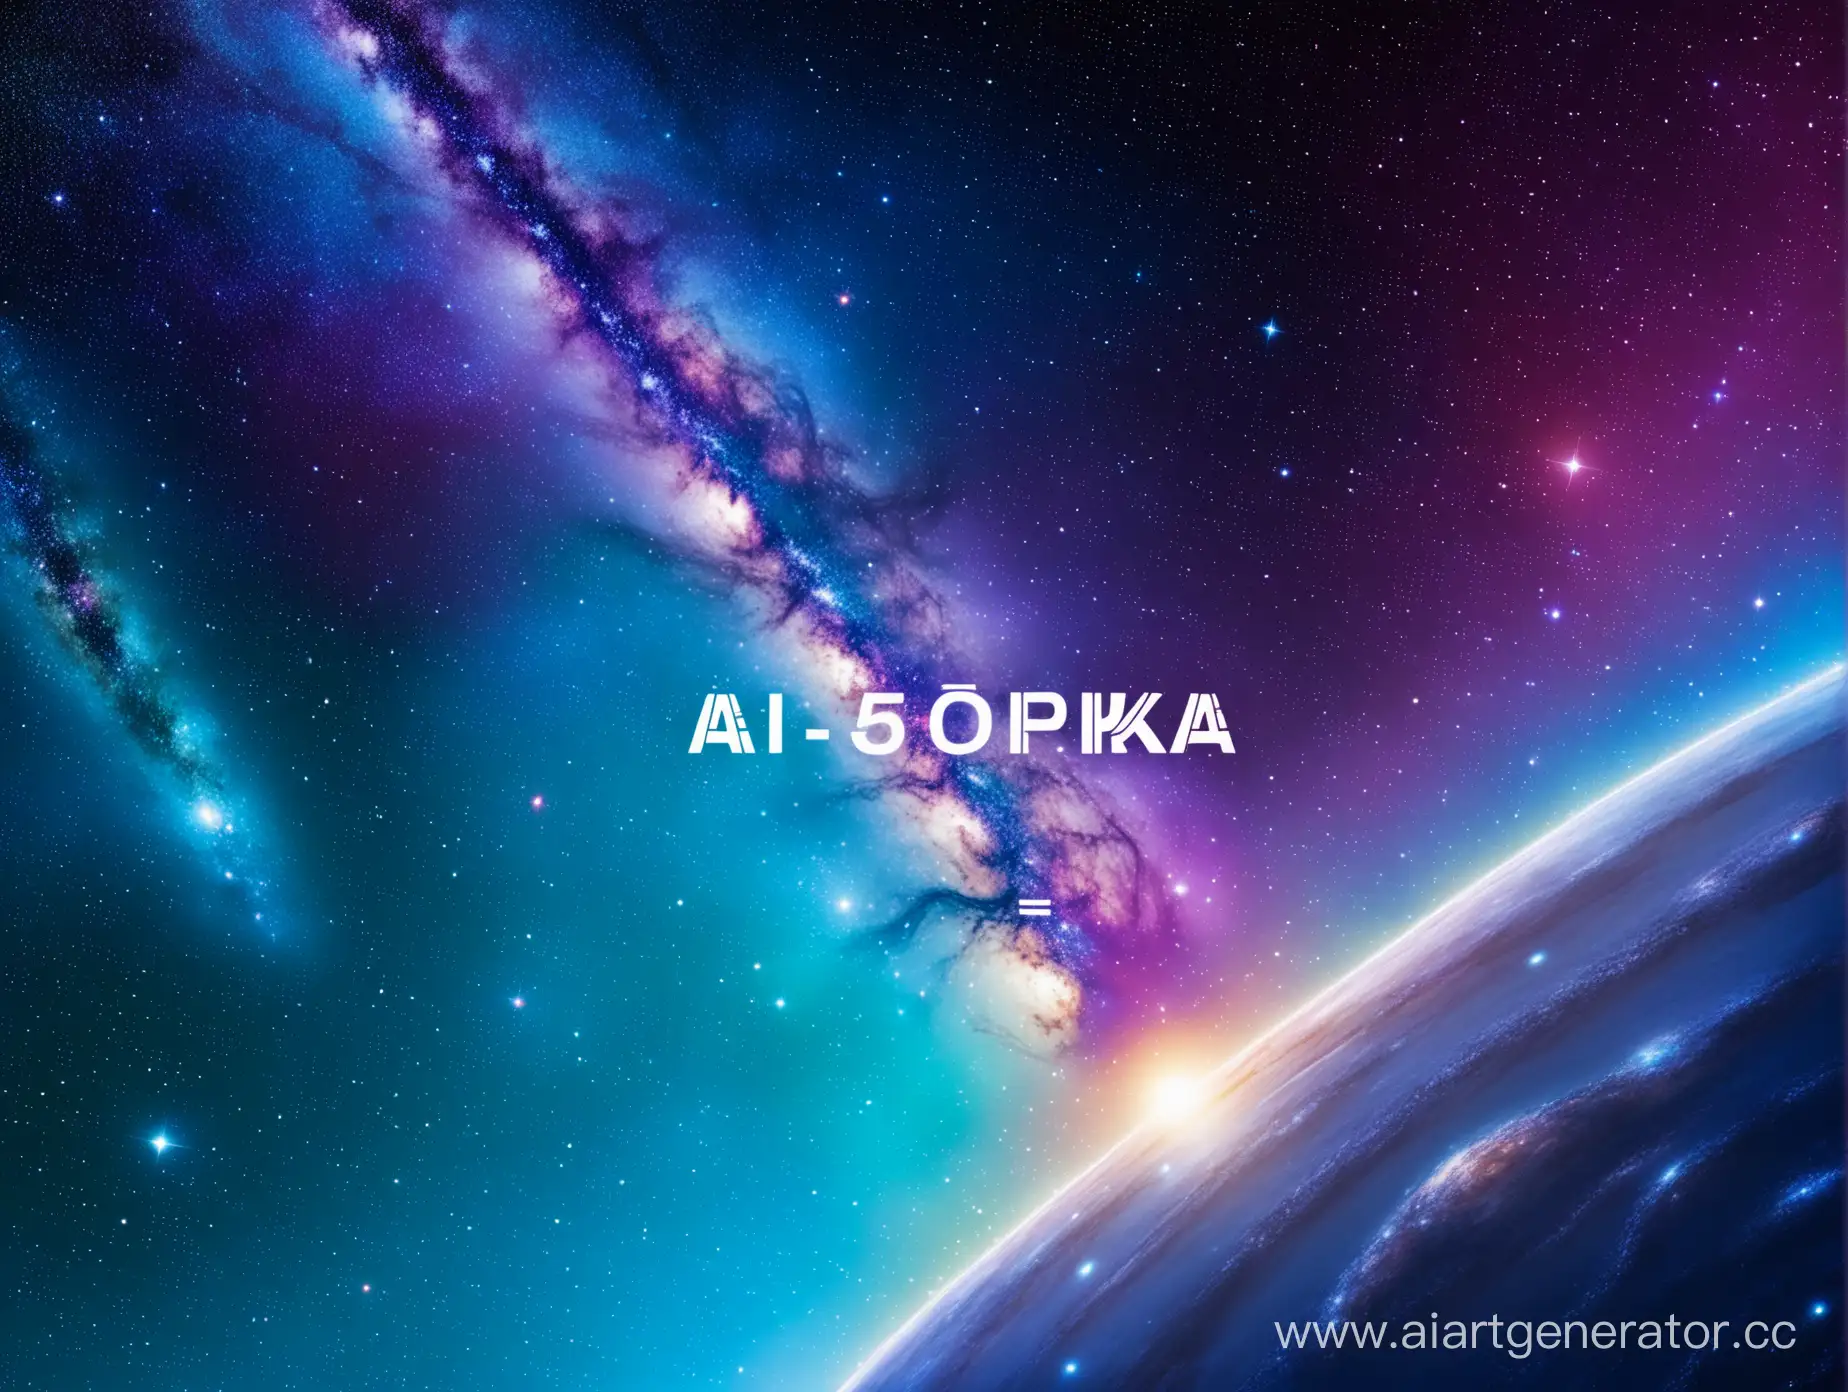 Cosmic-Background-with-AI-5OPKA-Inscription-and-BlueHaired-Figure